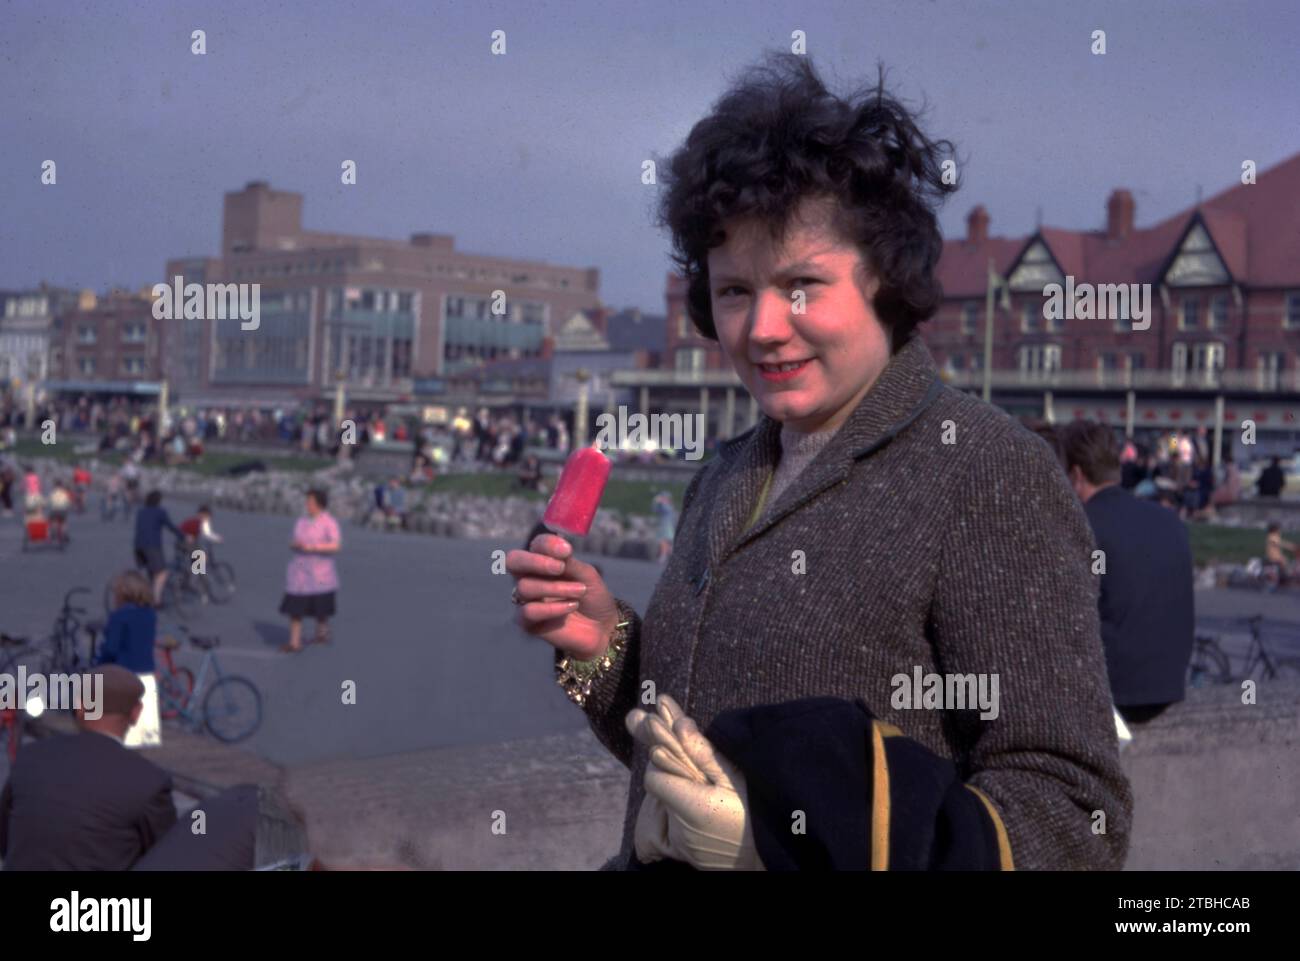 A young woman enjoying a strawberry Mivvi iced lolly c1962   Photo by Tony Henshaw Archive Stock Photo